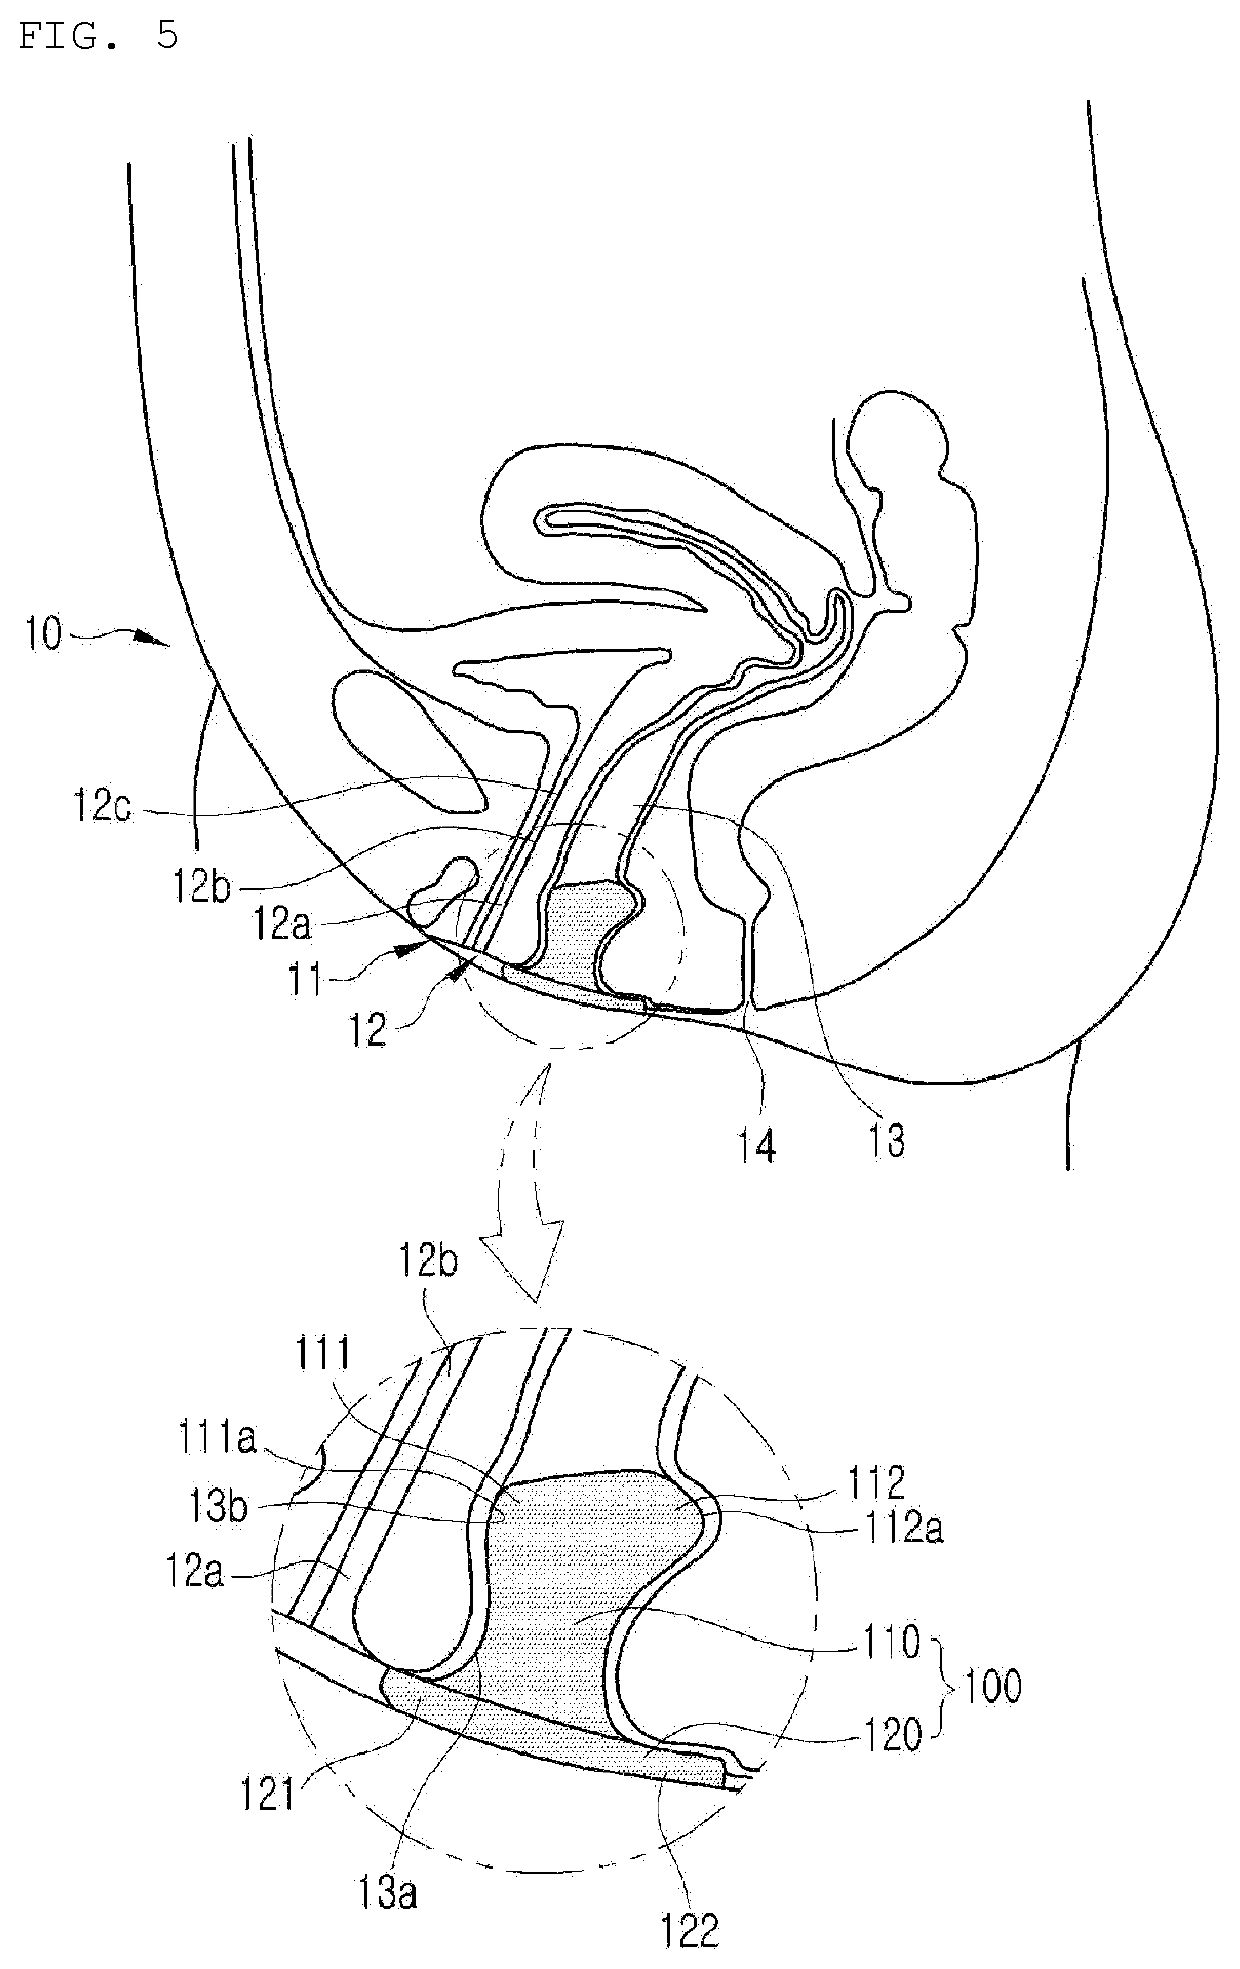 Apparatus for Treating Urinary Incontinence, and Panties Having Same